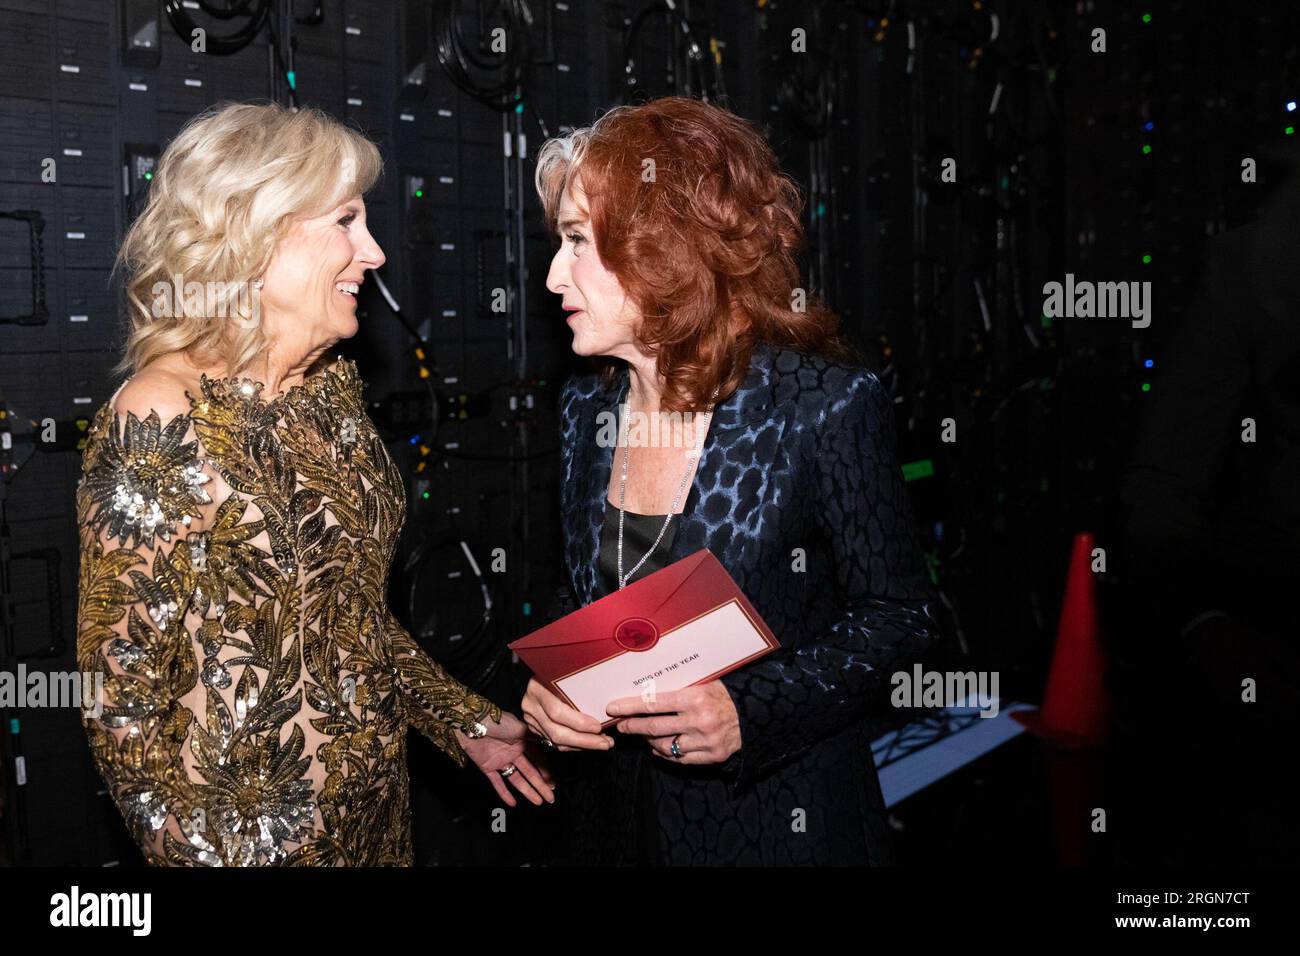 Reportage: First Lady Jill Biden talks to Bonnie Raitt after presenting her with the award for Song of the Year at the Grammy Awards, Sunday, February 5, 2023, at the Crypto.com Arena in Los Angeles. Stock Photo